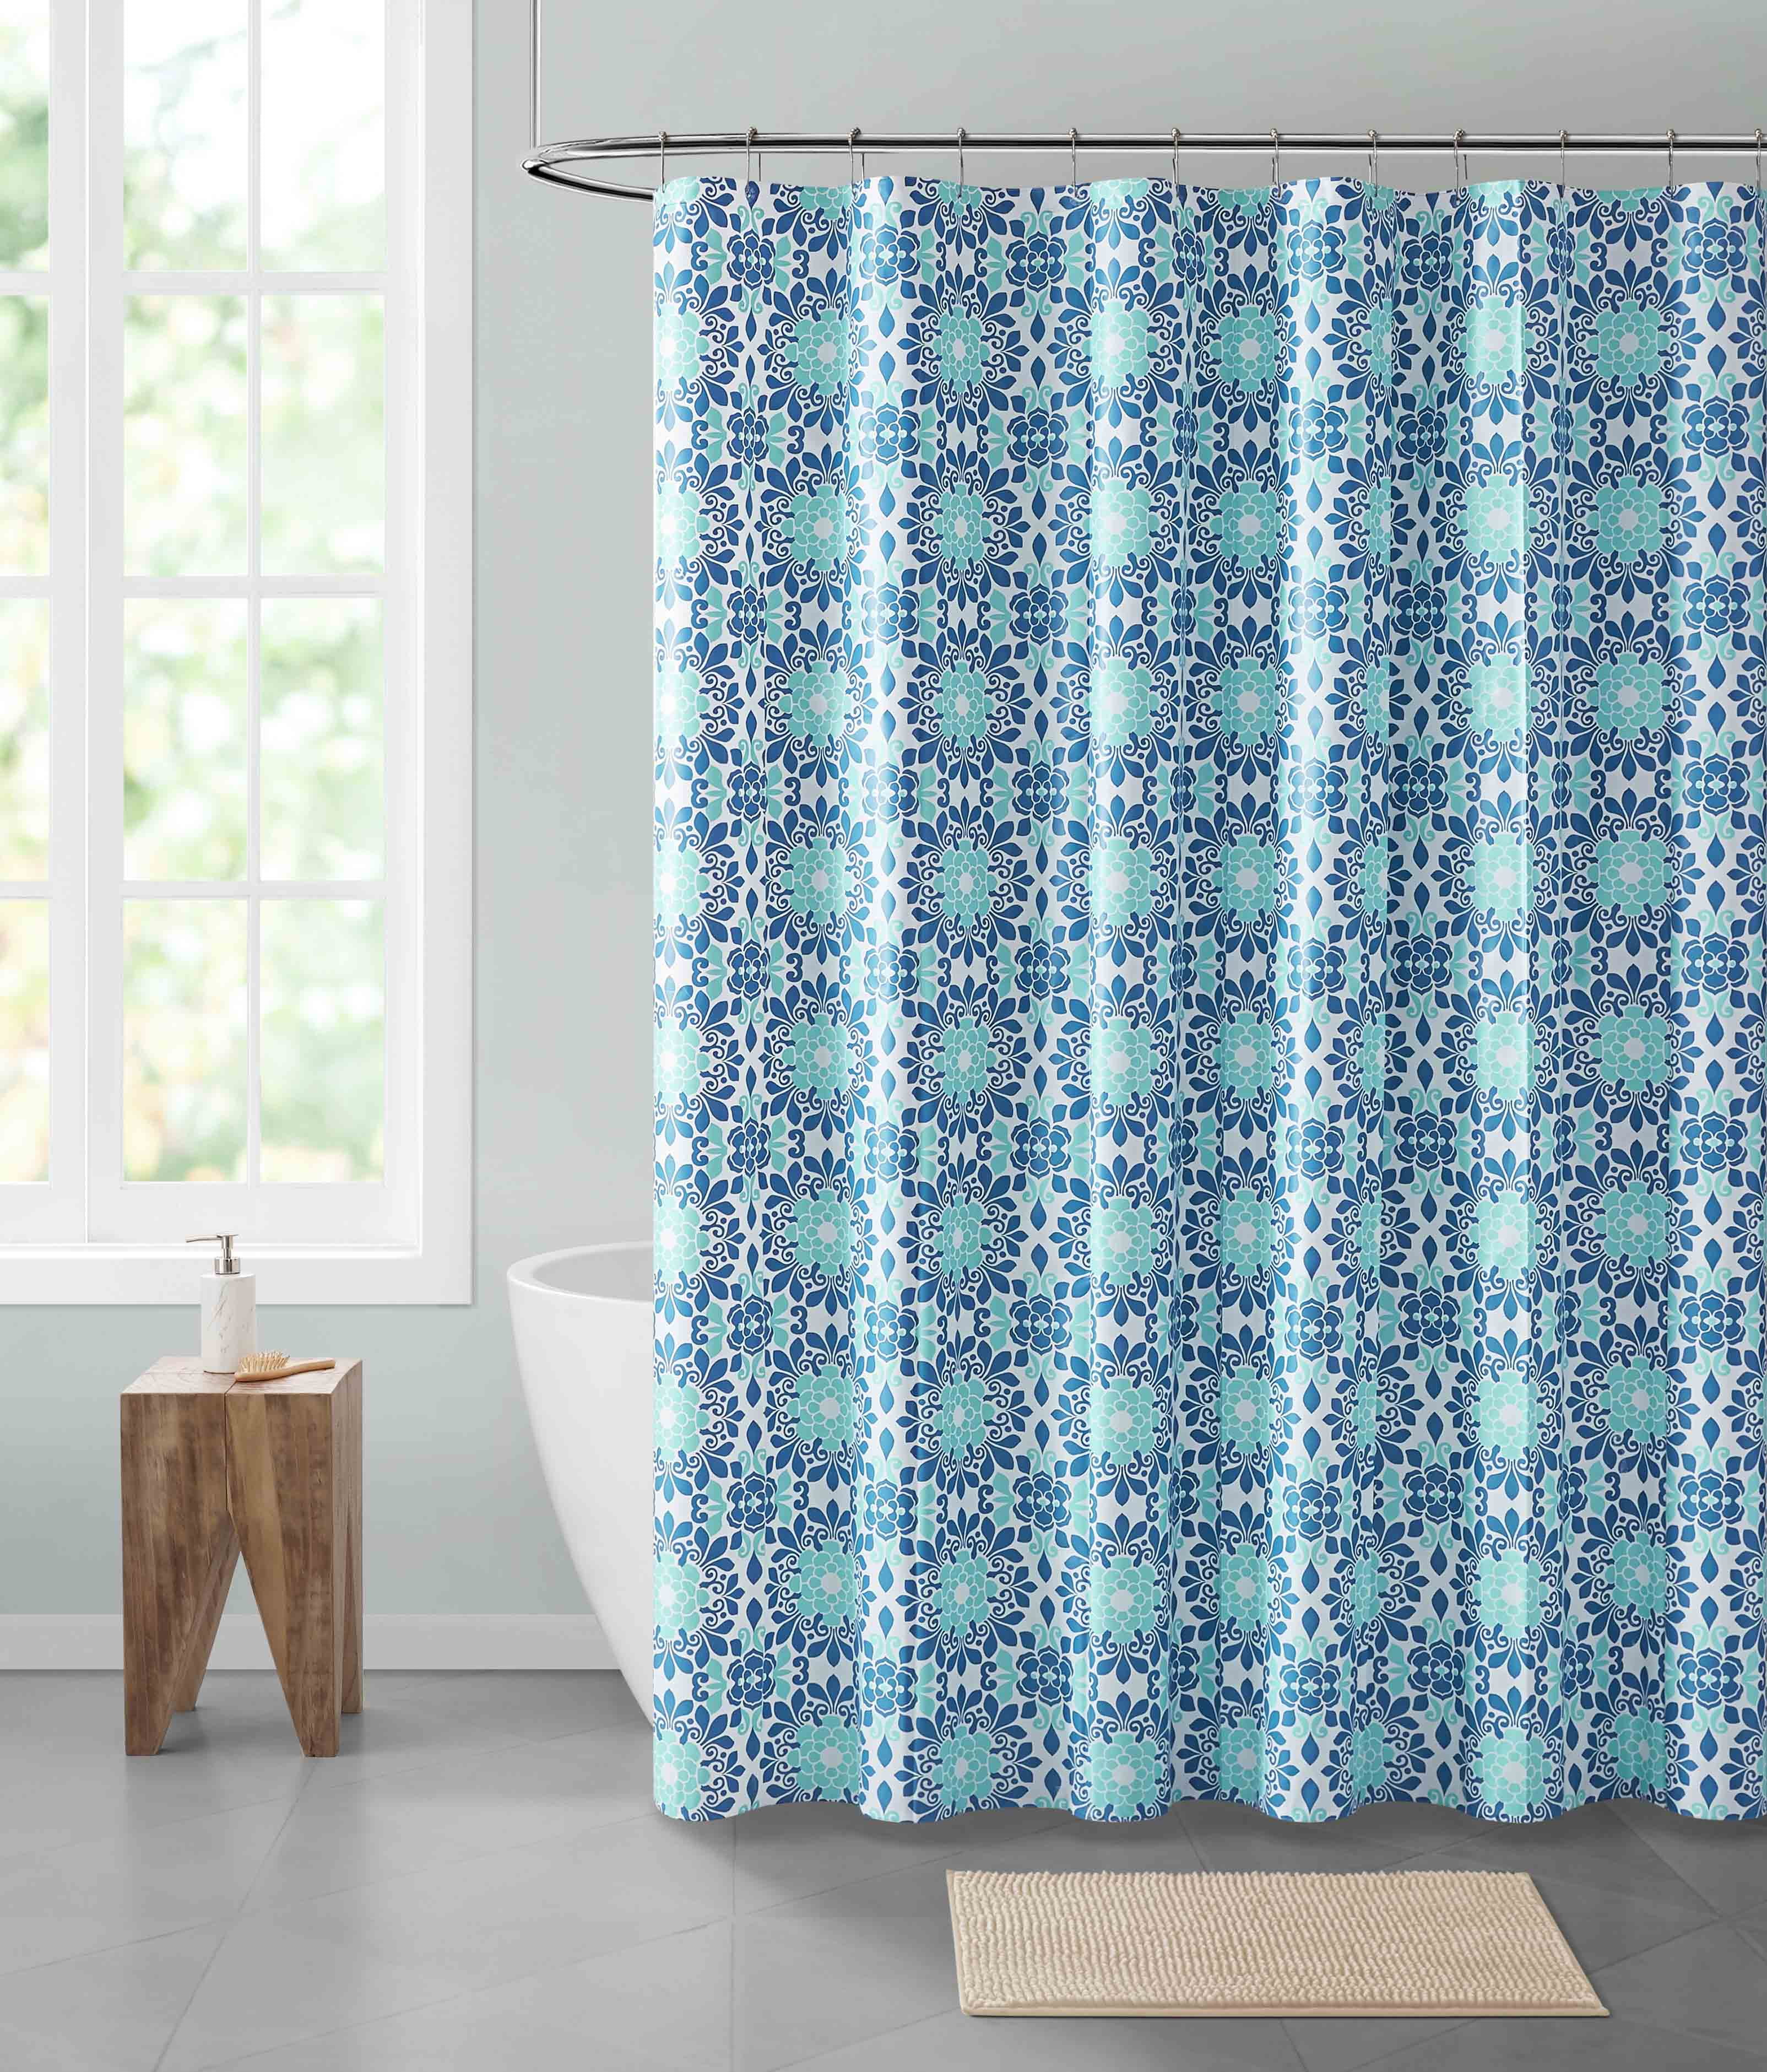 Mildew Resist Soft Non-Toxic PEVA Shower Curtain Liner w/ magnets Eco-Friendly 